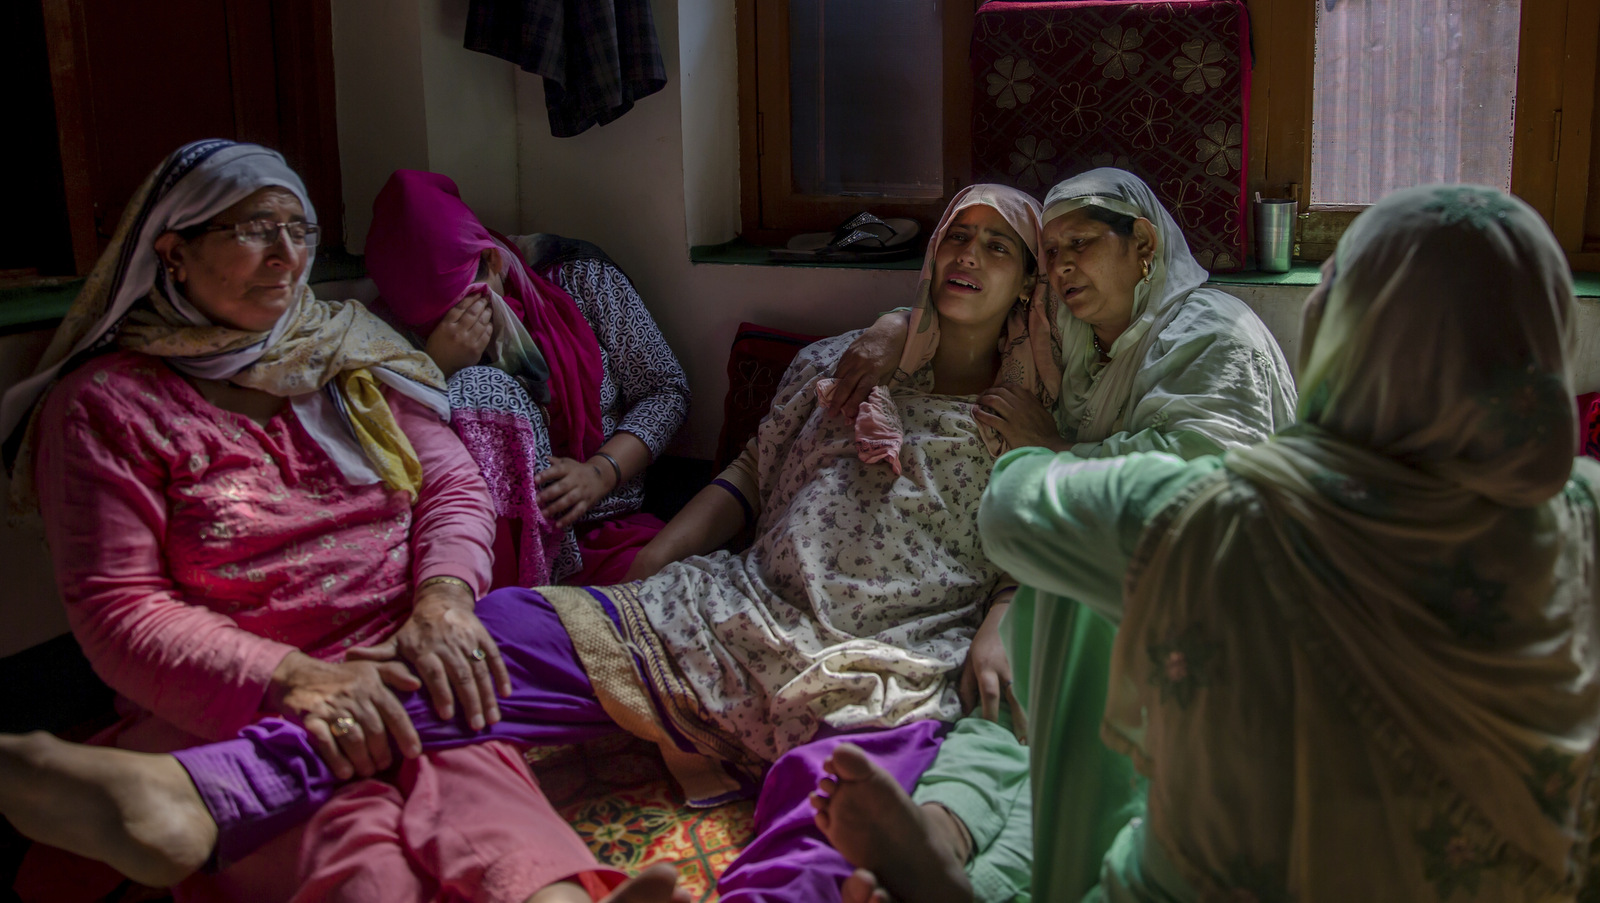 Unidentified relatives comfort wailing Rukaya Firdous, pregnant wife of a Kashmiri civilian who was killed during a protest by Indian police in Begumbagh, about 32 kilometers (20miles) south of Srinagar, Indian occupied Kashmir, Aug. 1, 2017. (AP/Dar Yasin)